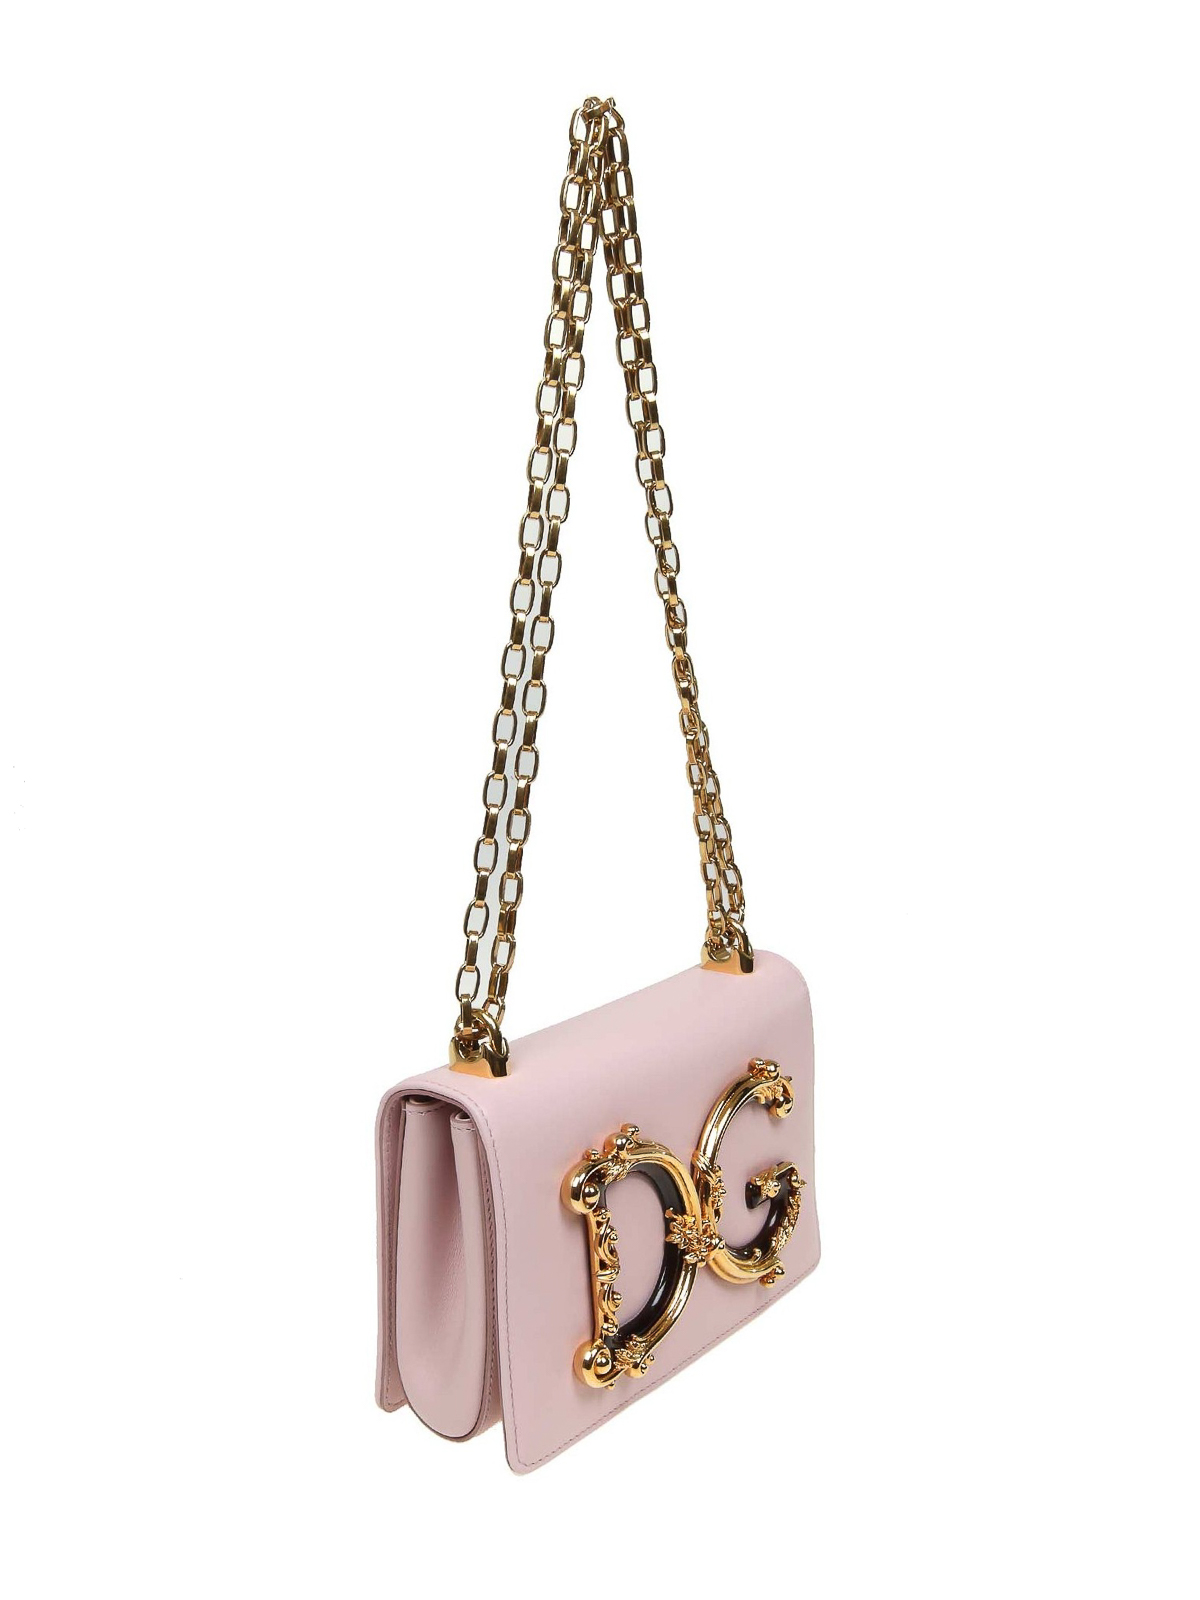 dolce and gabbana side bags